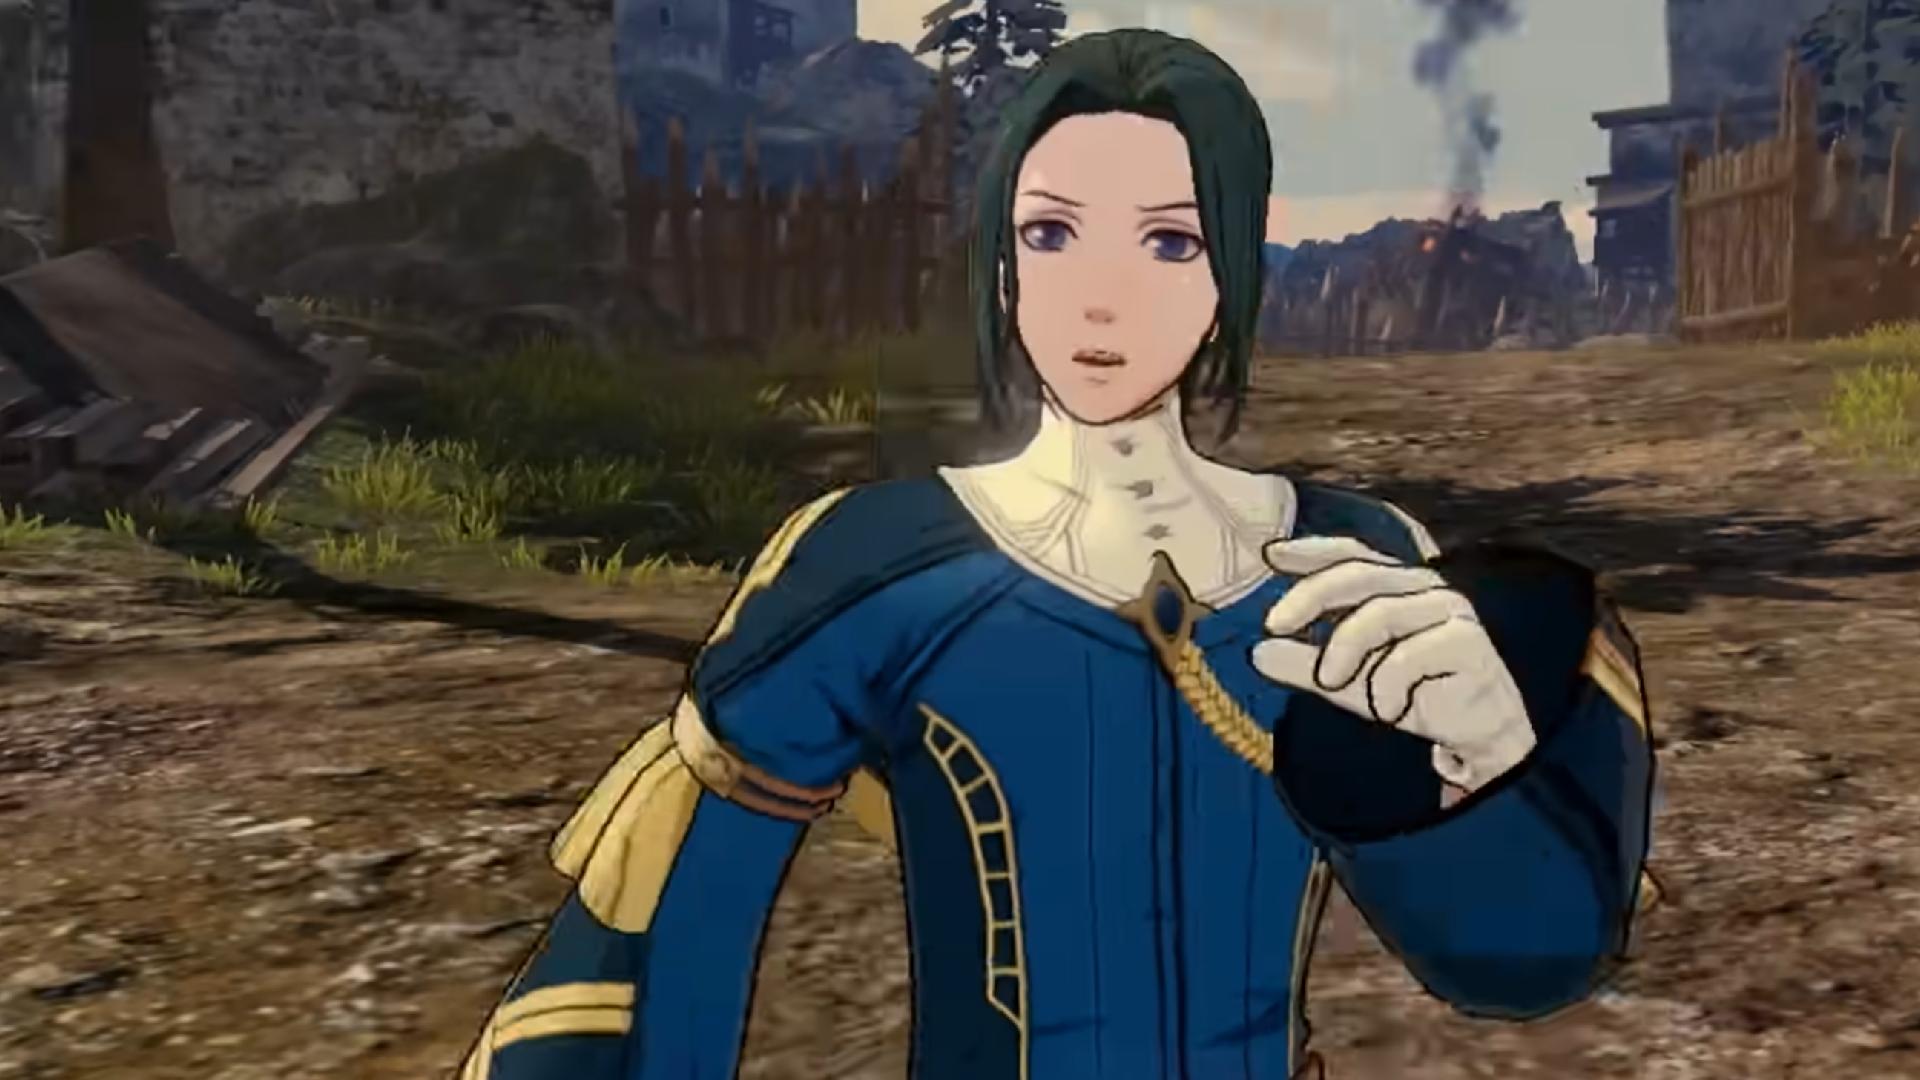 Fire Emblem Warriors Three Hopes characters that are playable